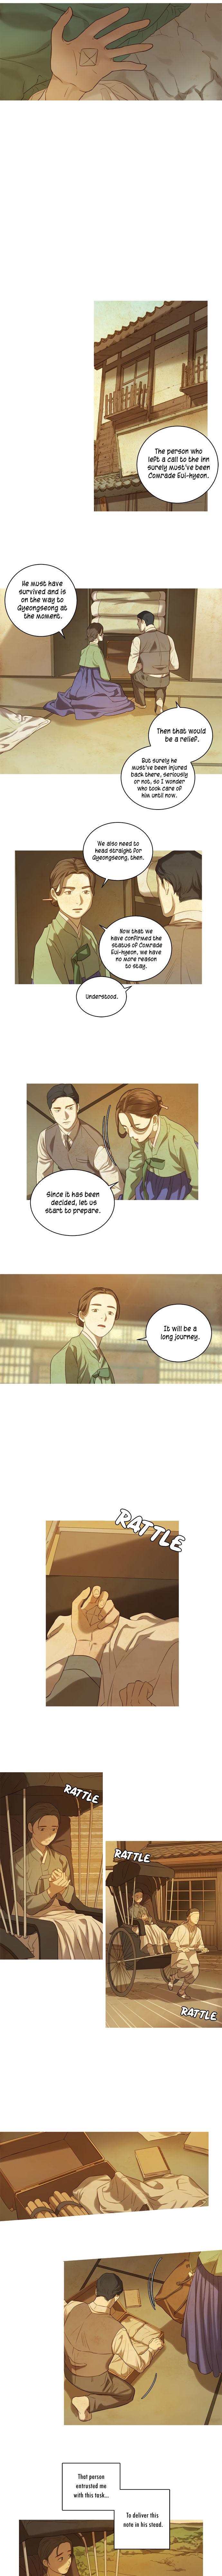 Gorae Byul - The Gyeongseong Mermaid - Chapter 6 Page 9